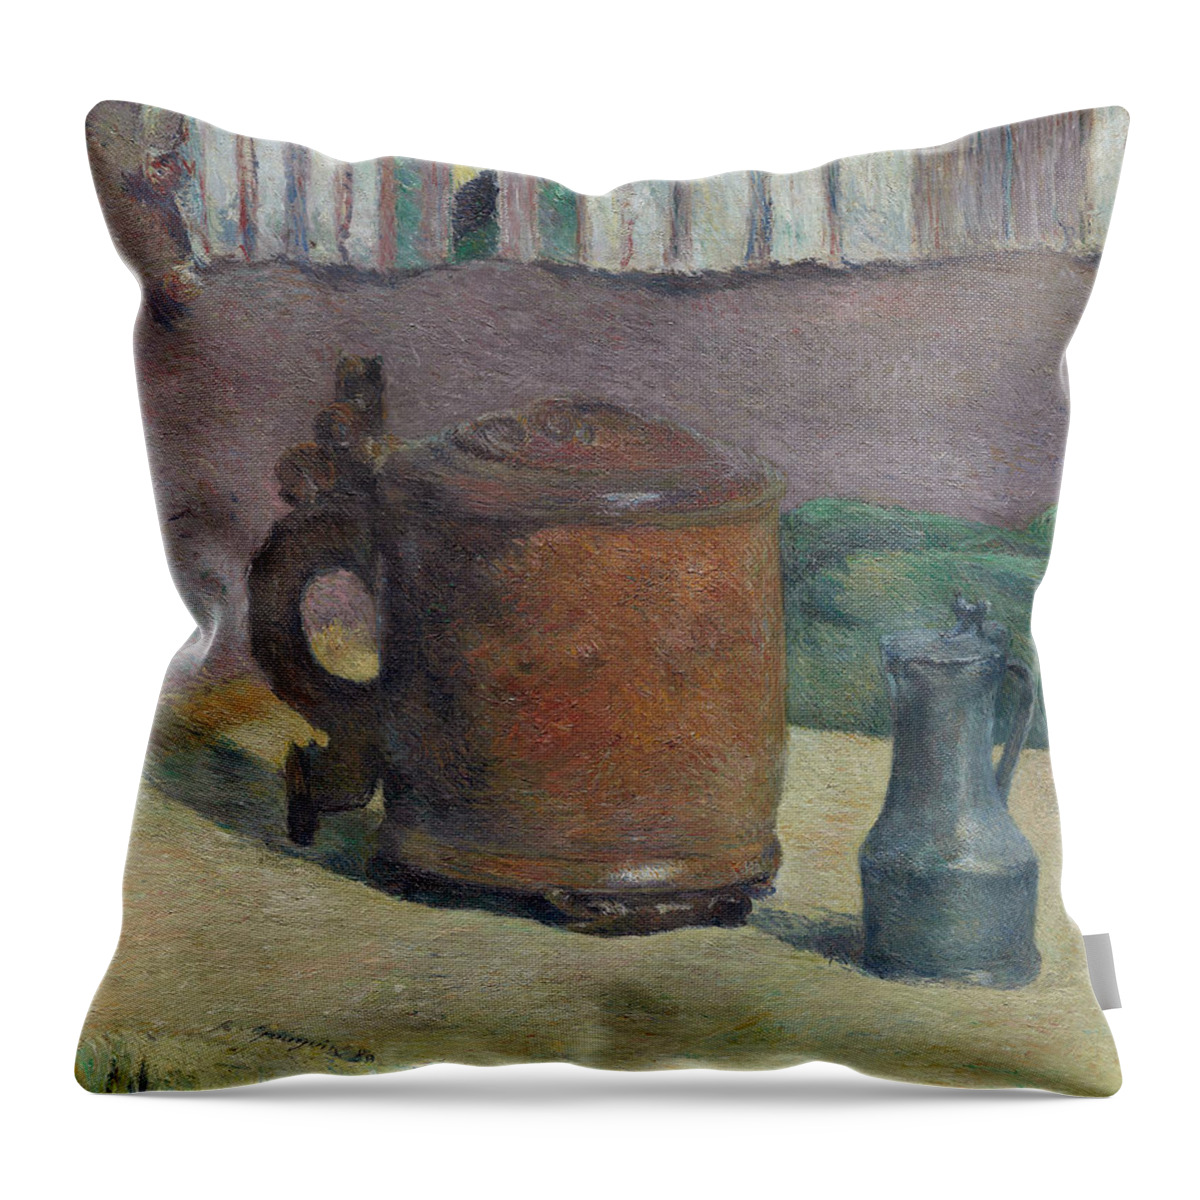 19th Century Painters Throw Pillow featuring the painting Still Life - Wood Tankard and Metal Pitcher by Paul Gauguin